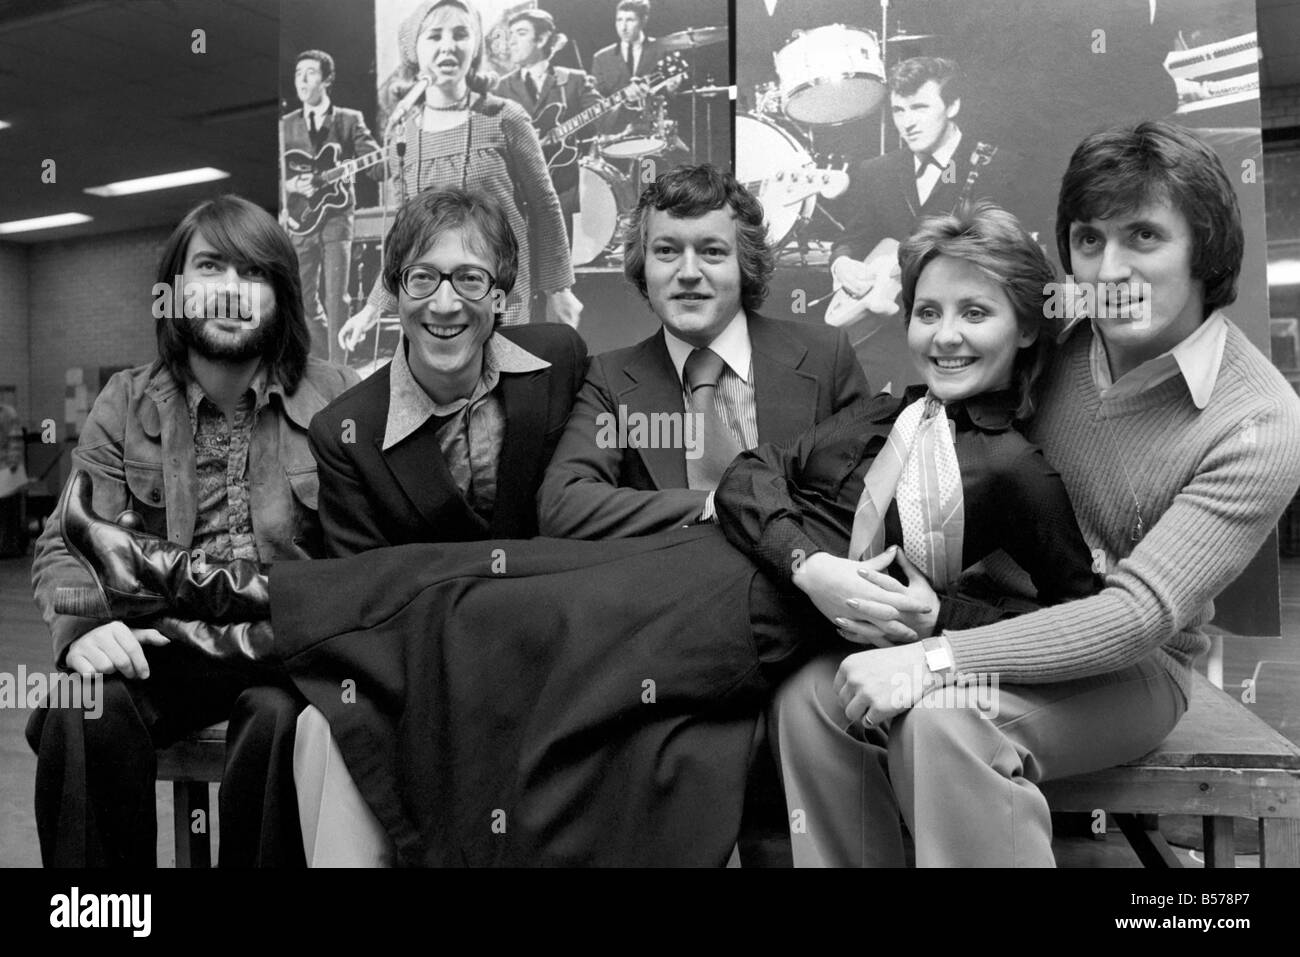 The Shadows for the Eurovision song contest with Lulu. January 1975  75-00043-005 Stock Photo - Alamy